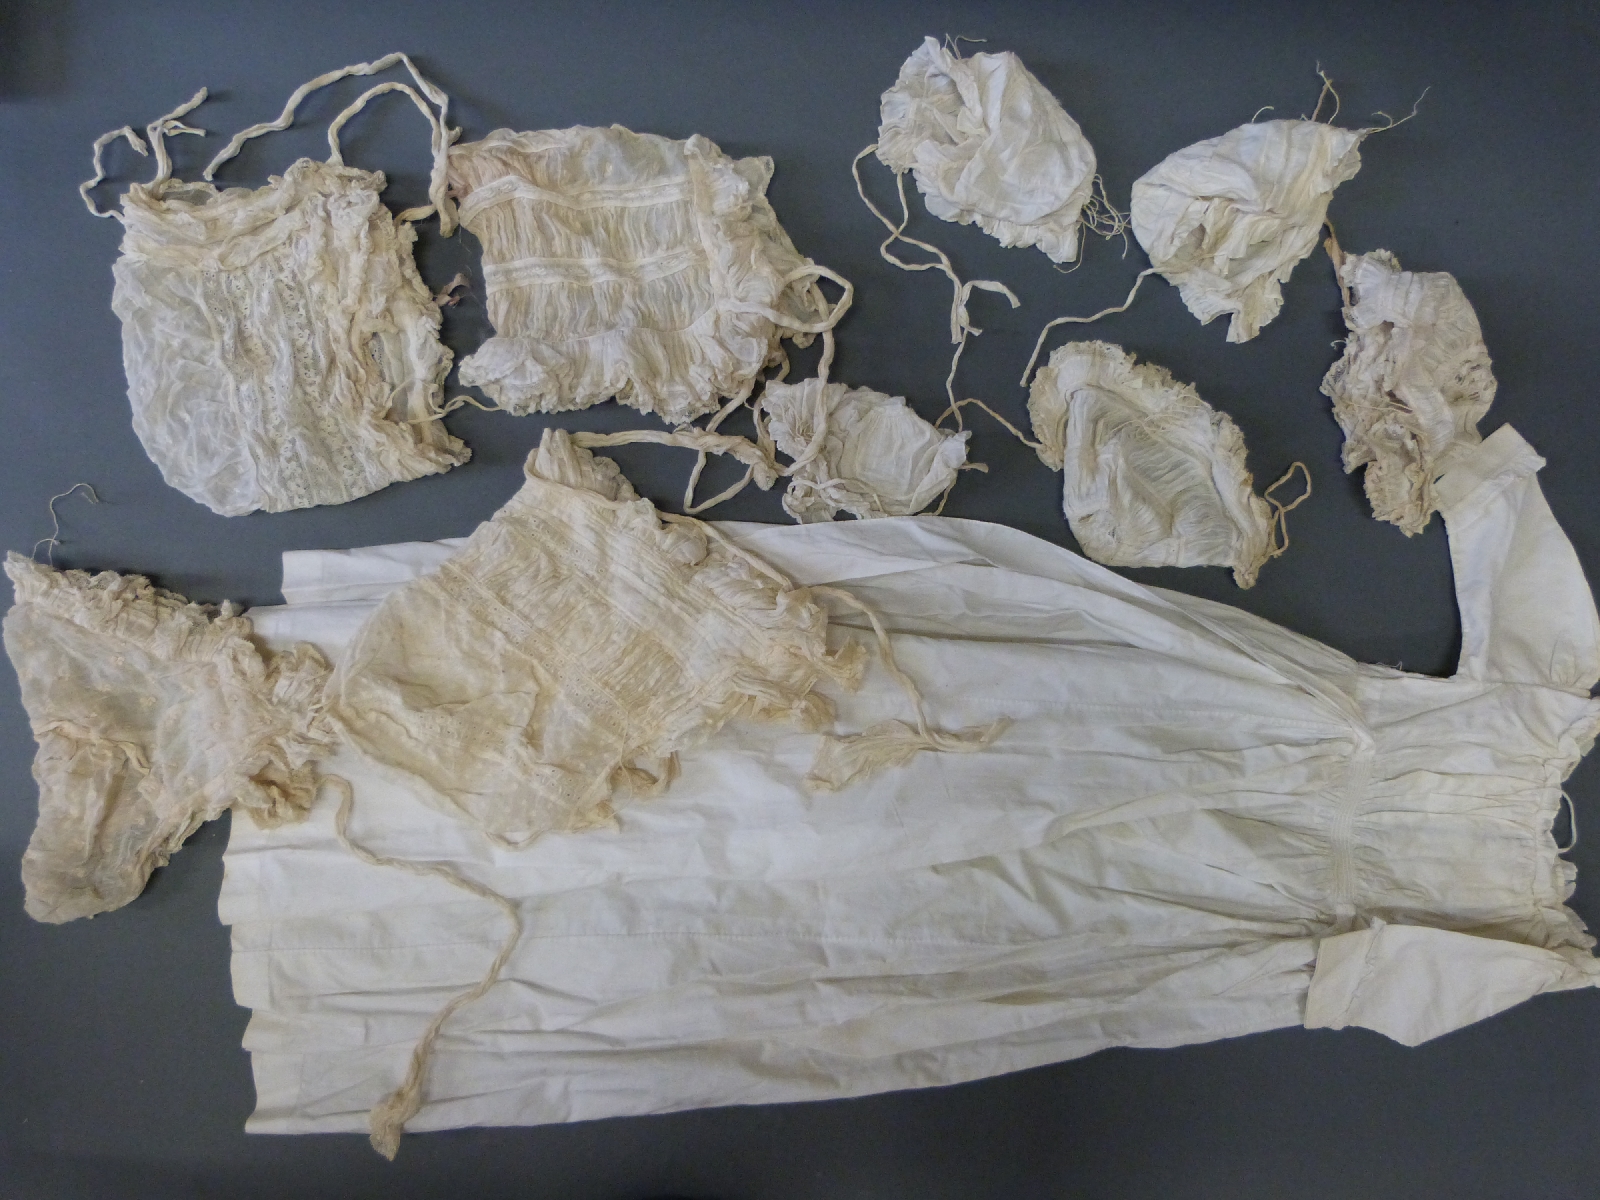 A collection of 19thC textiles to include cotton lace collars, lace trim, - Image 3 of 4